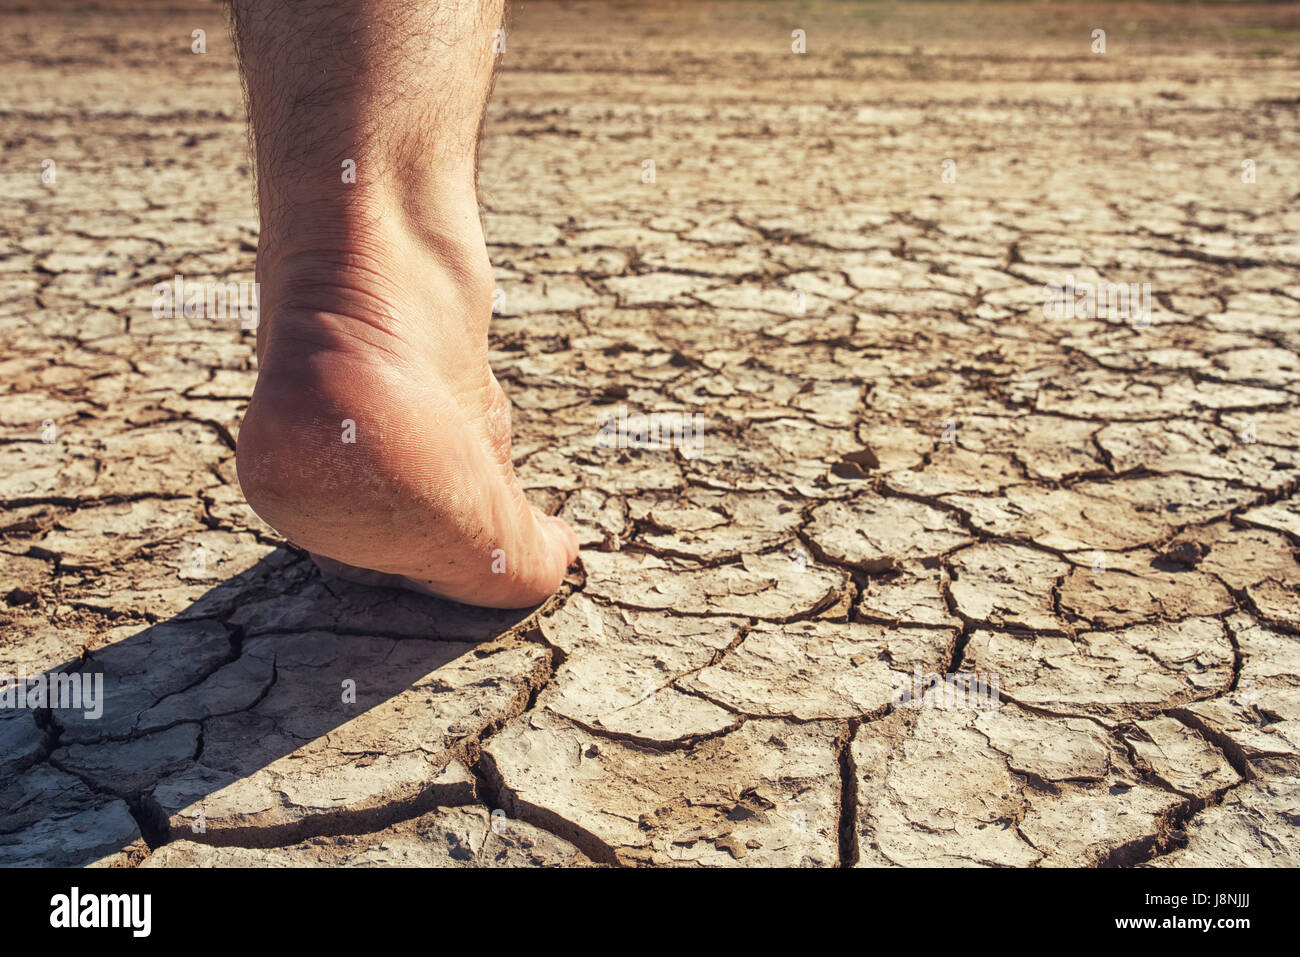 Cracked Soil drought.Global Warming concept. Stock Photo